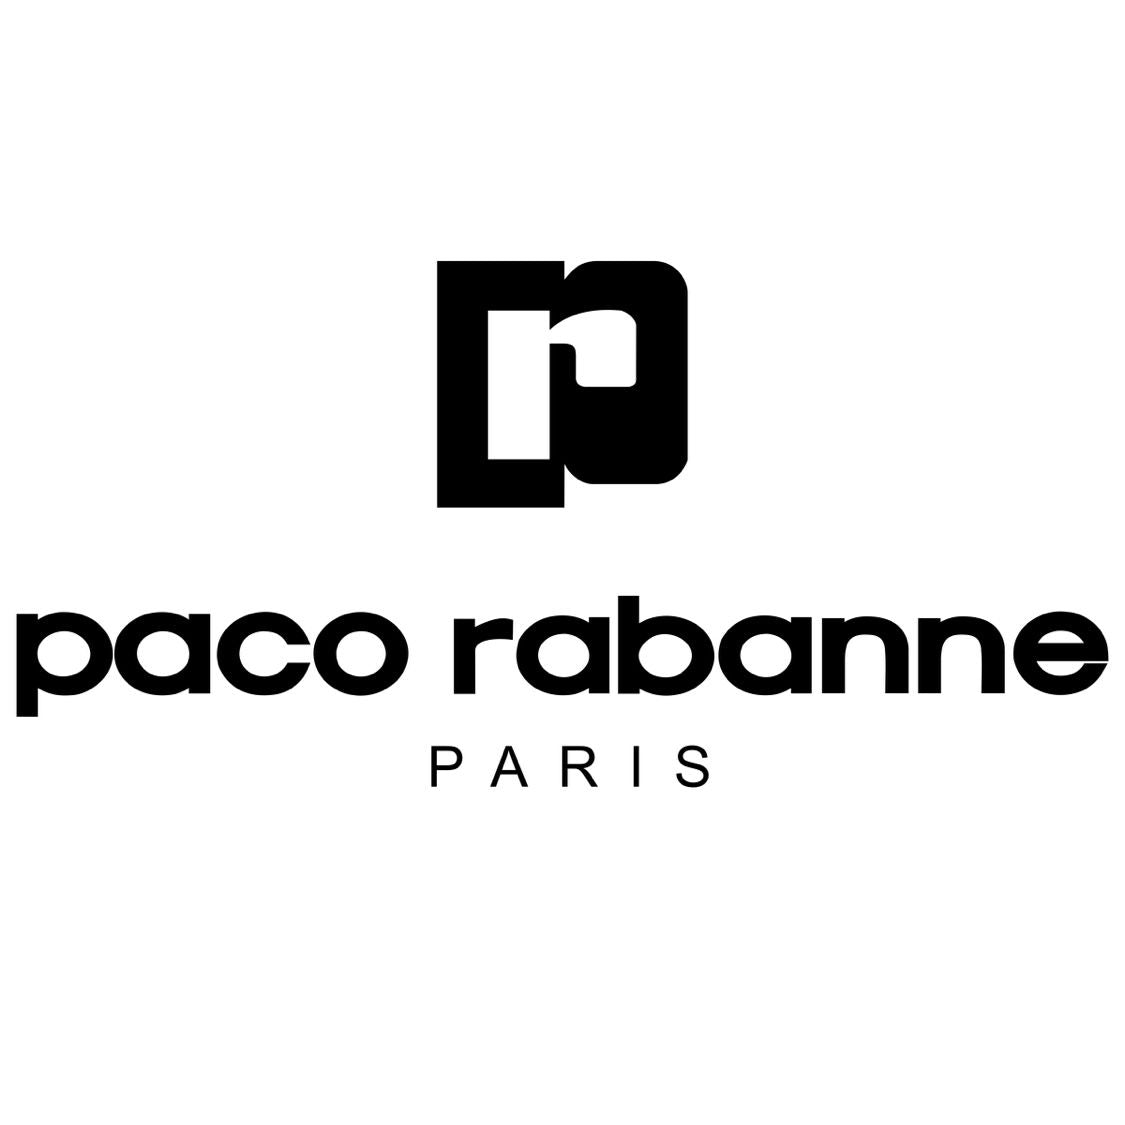 Paco Rabanne - Scent Samples UK